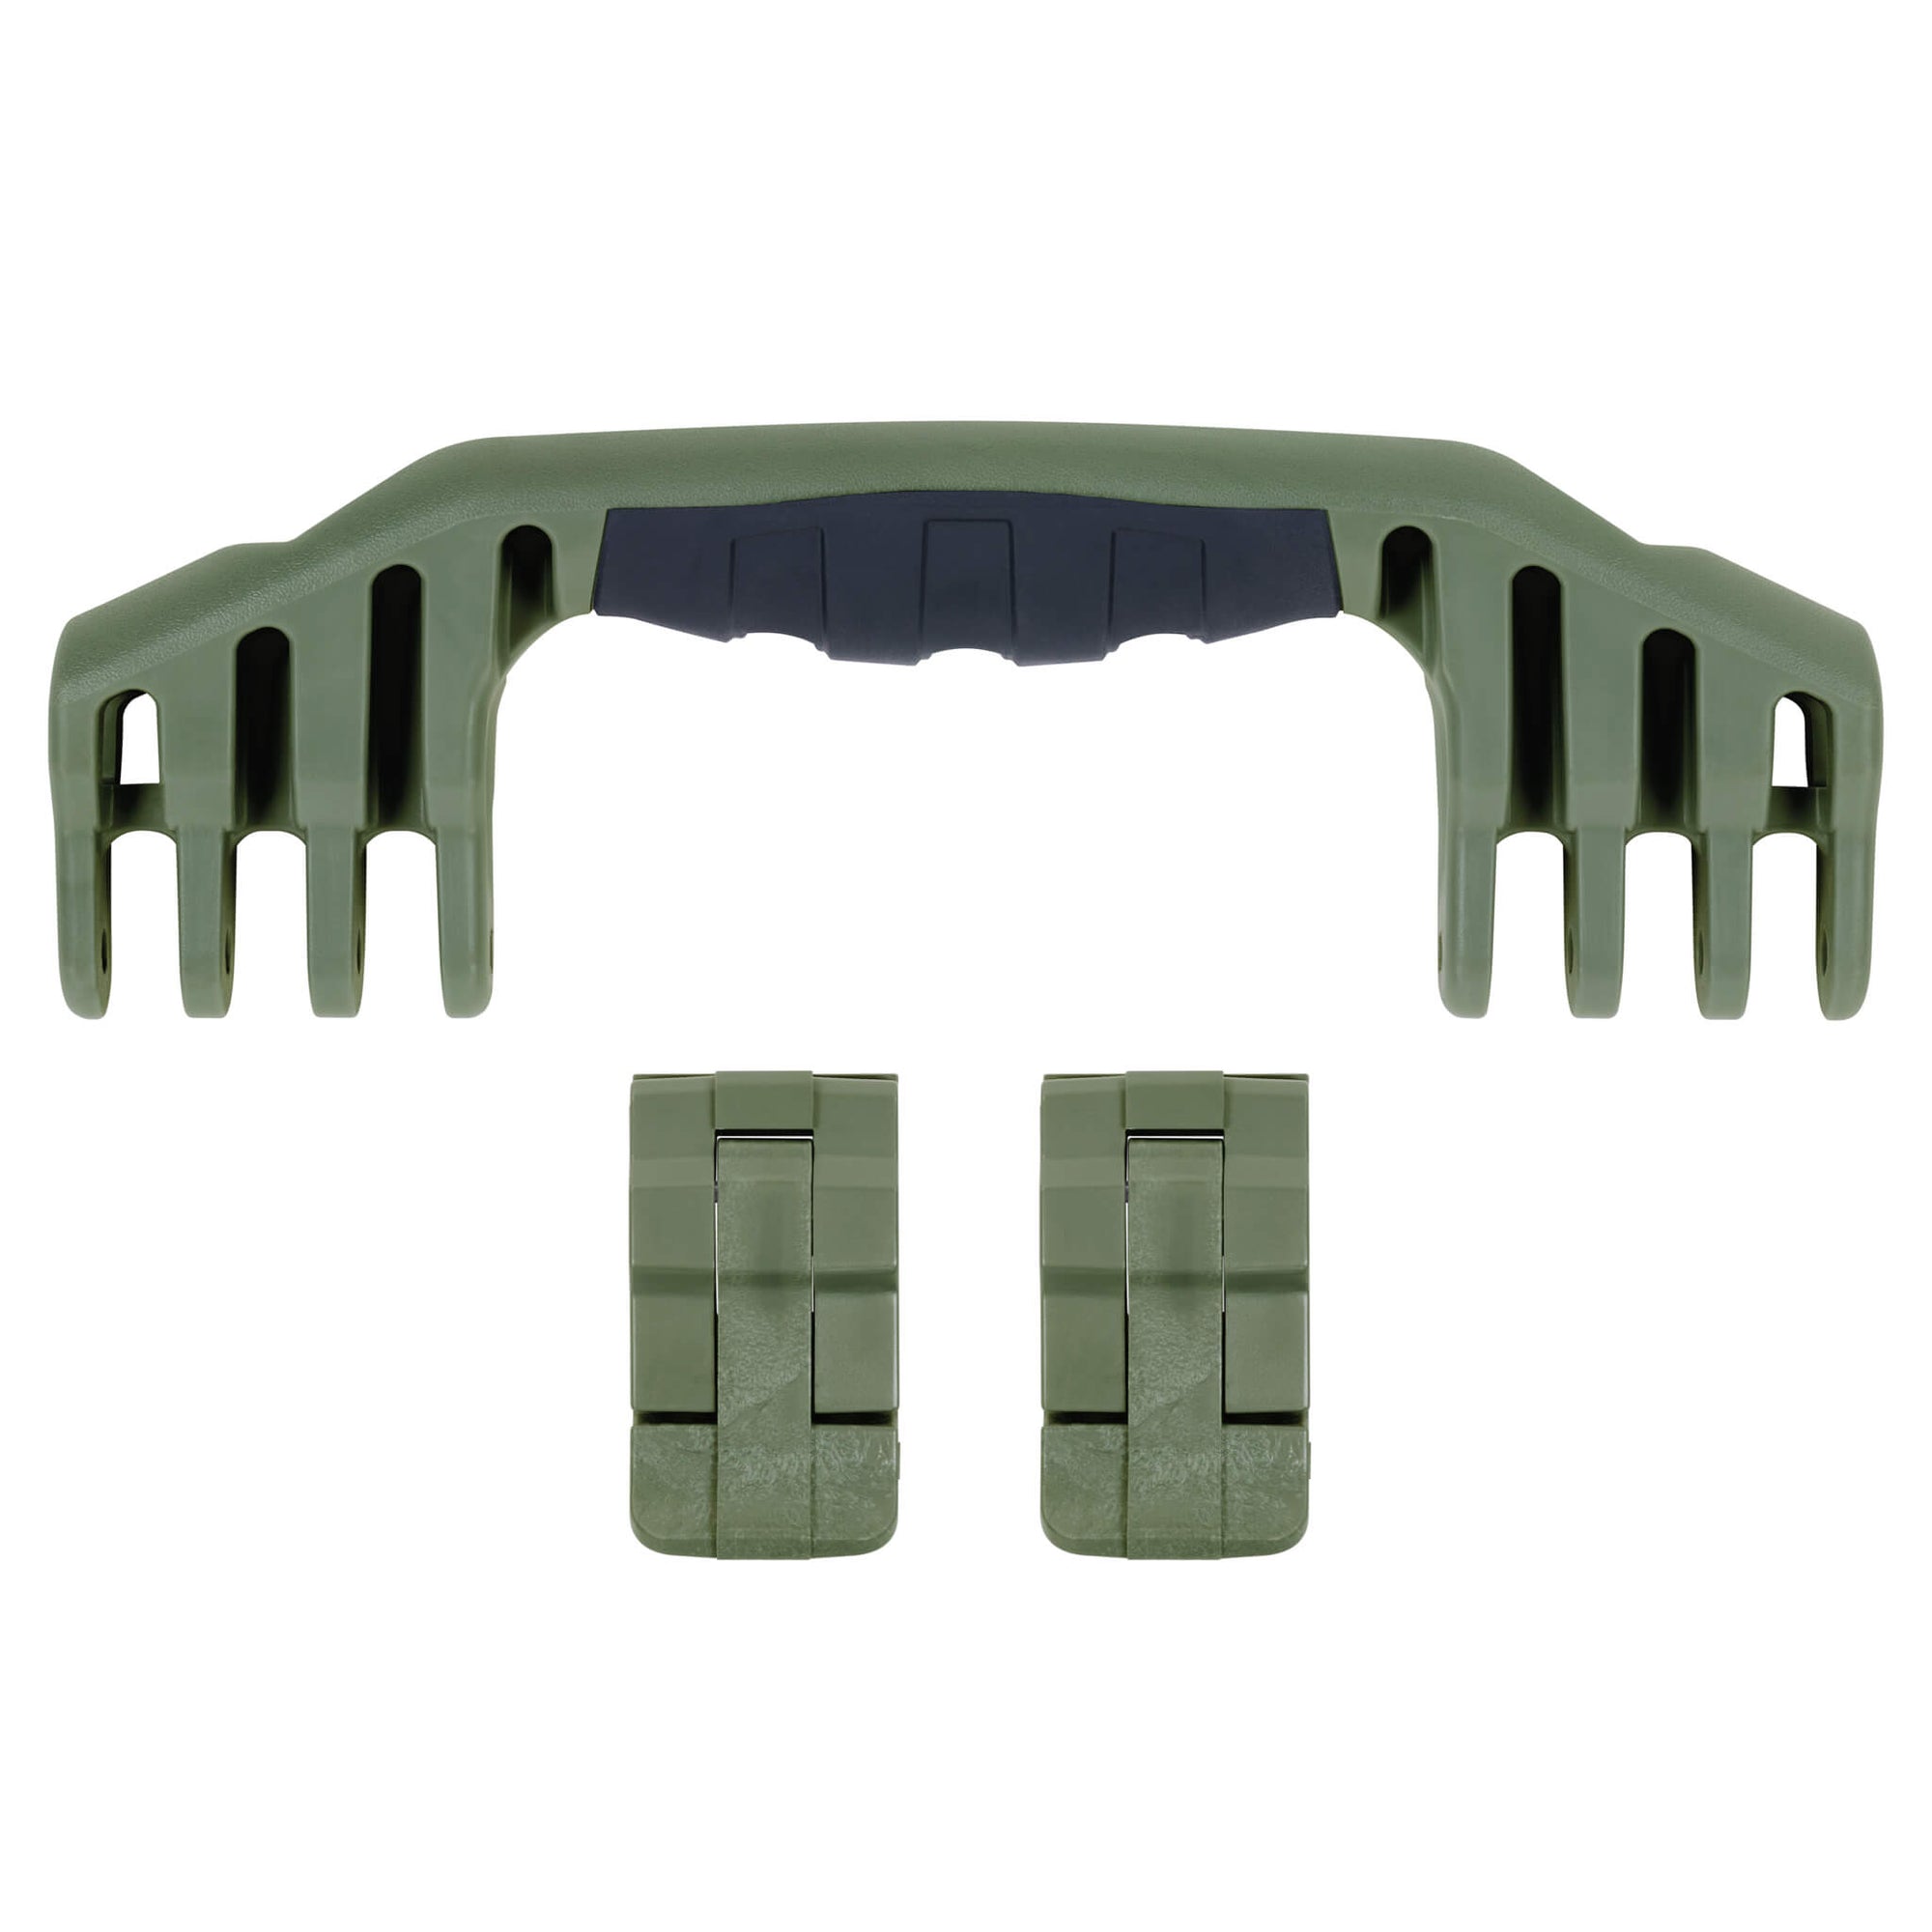 Pelican 1520 Replacement Handle & Latches, OD Green (Set of 1 Handle, 2 Latches) ColorCase 